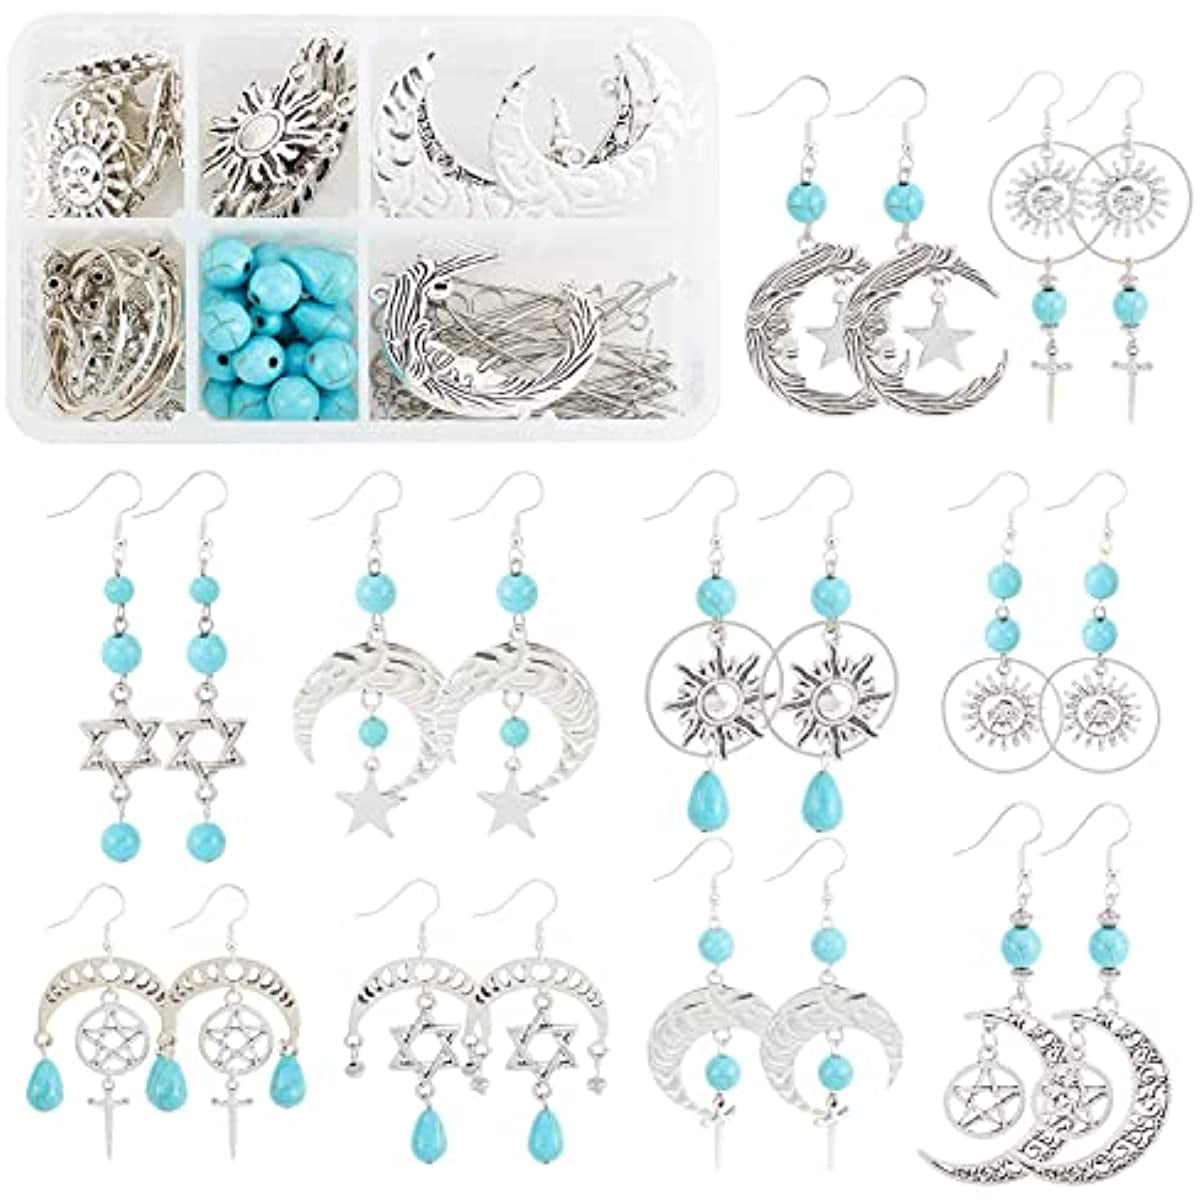 DIY Jewelry Kit - Golden Bliss Earring Kit by  – Too Cute  Beads